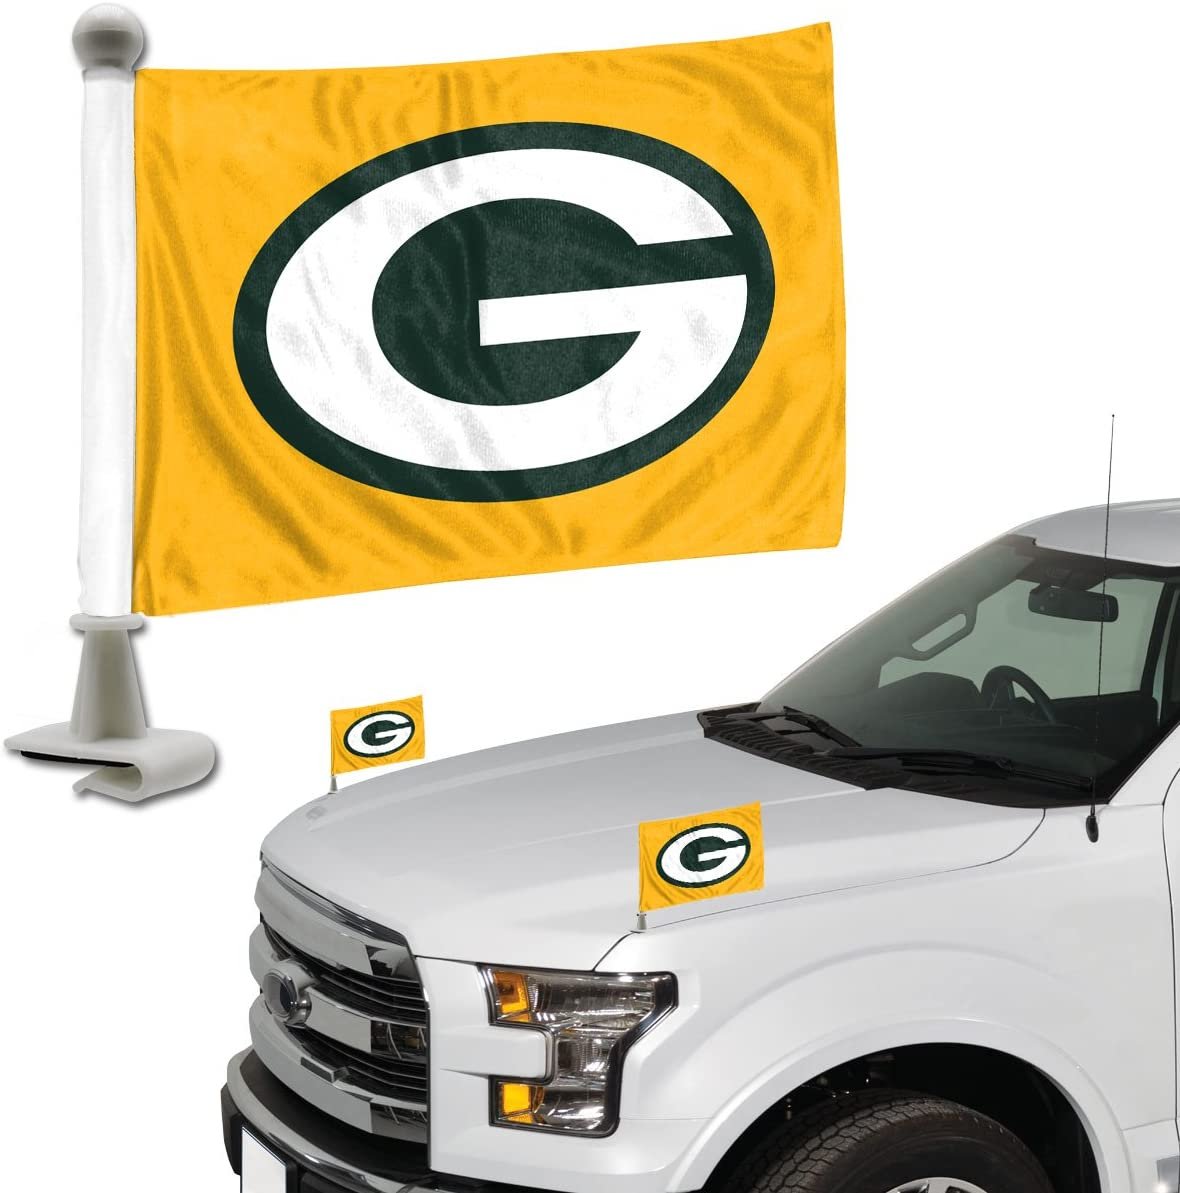 FANMATS ProMark NFL Green Bay Packers Flag Set 2-Piece Ambassador Style, Team Color, One Size